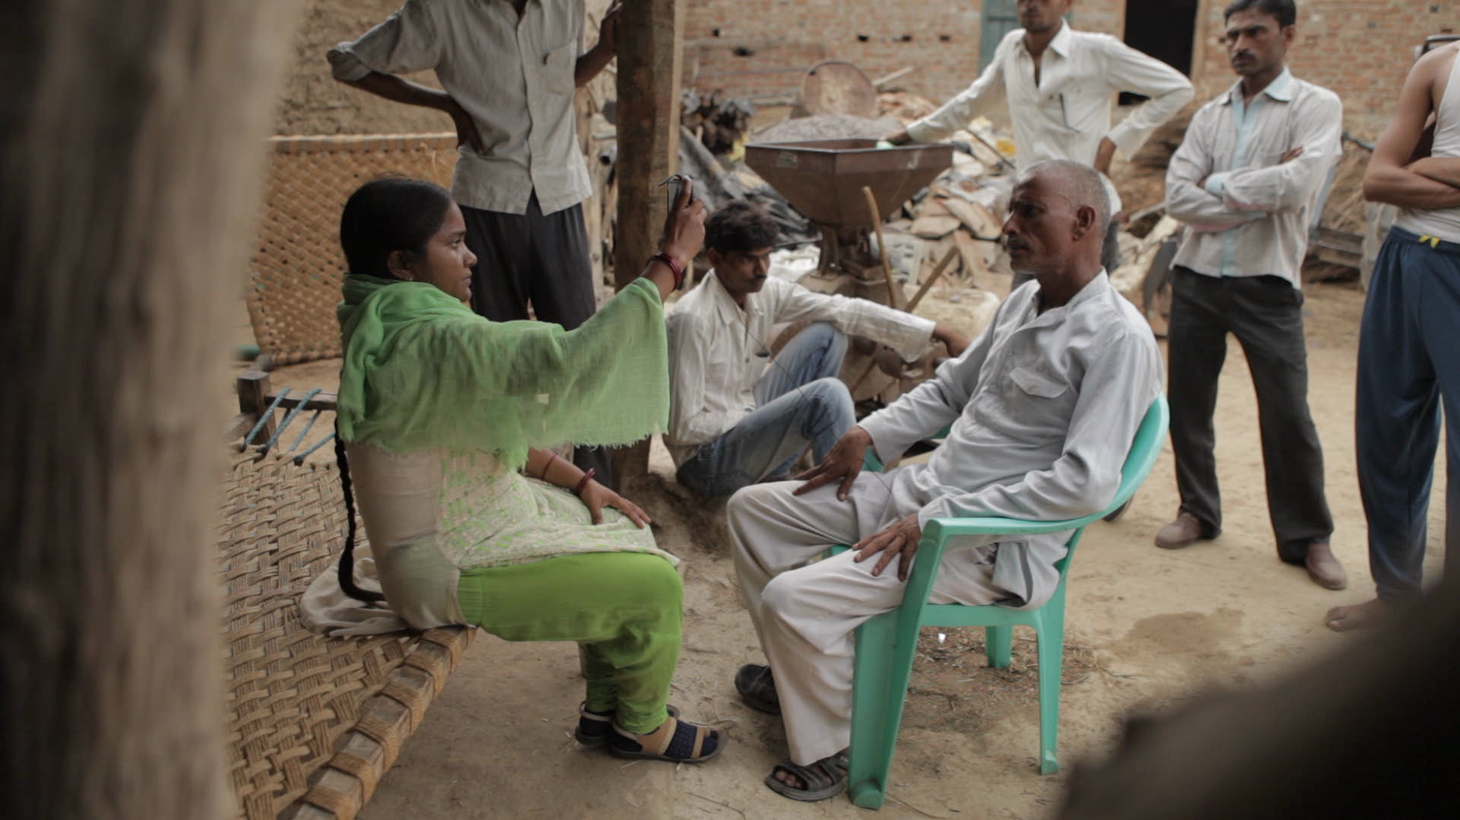 Meera Devi interviews the family member of a victim of an accident at an illegal mine.